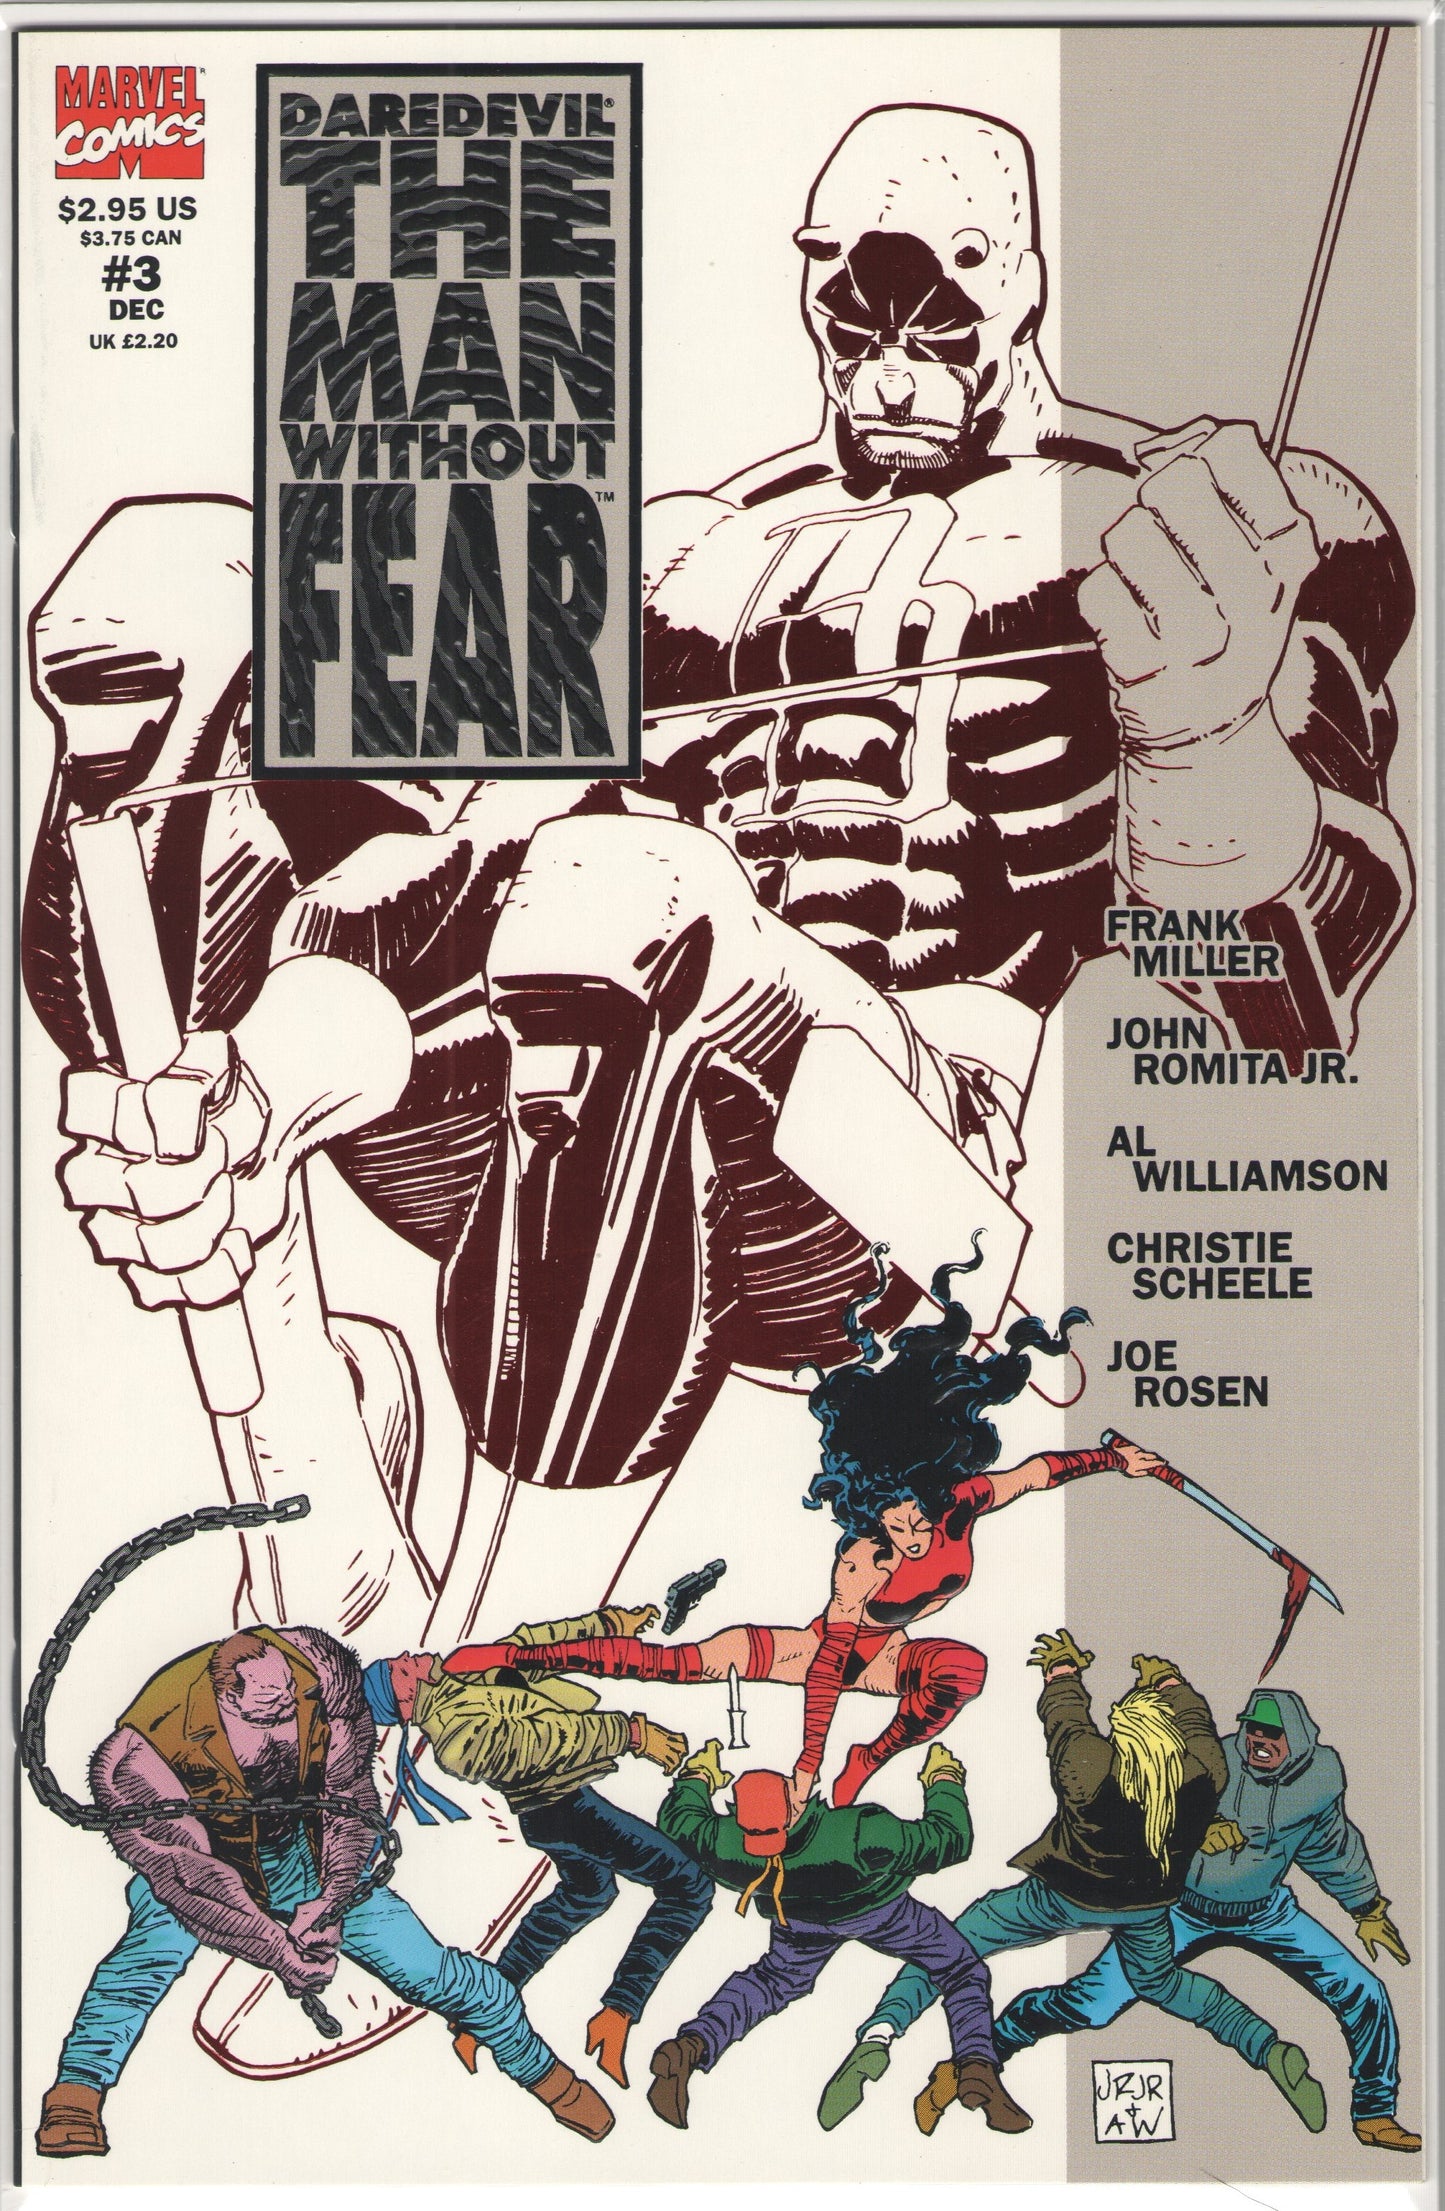 Daredevil: The Man Without Fear (1993) Complete Limited Series